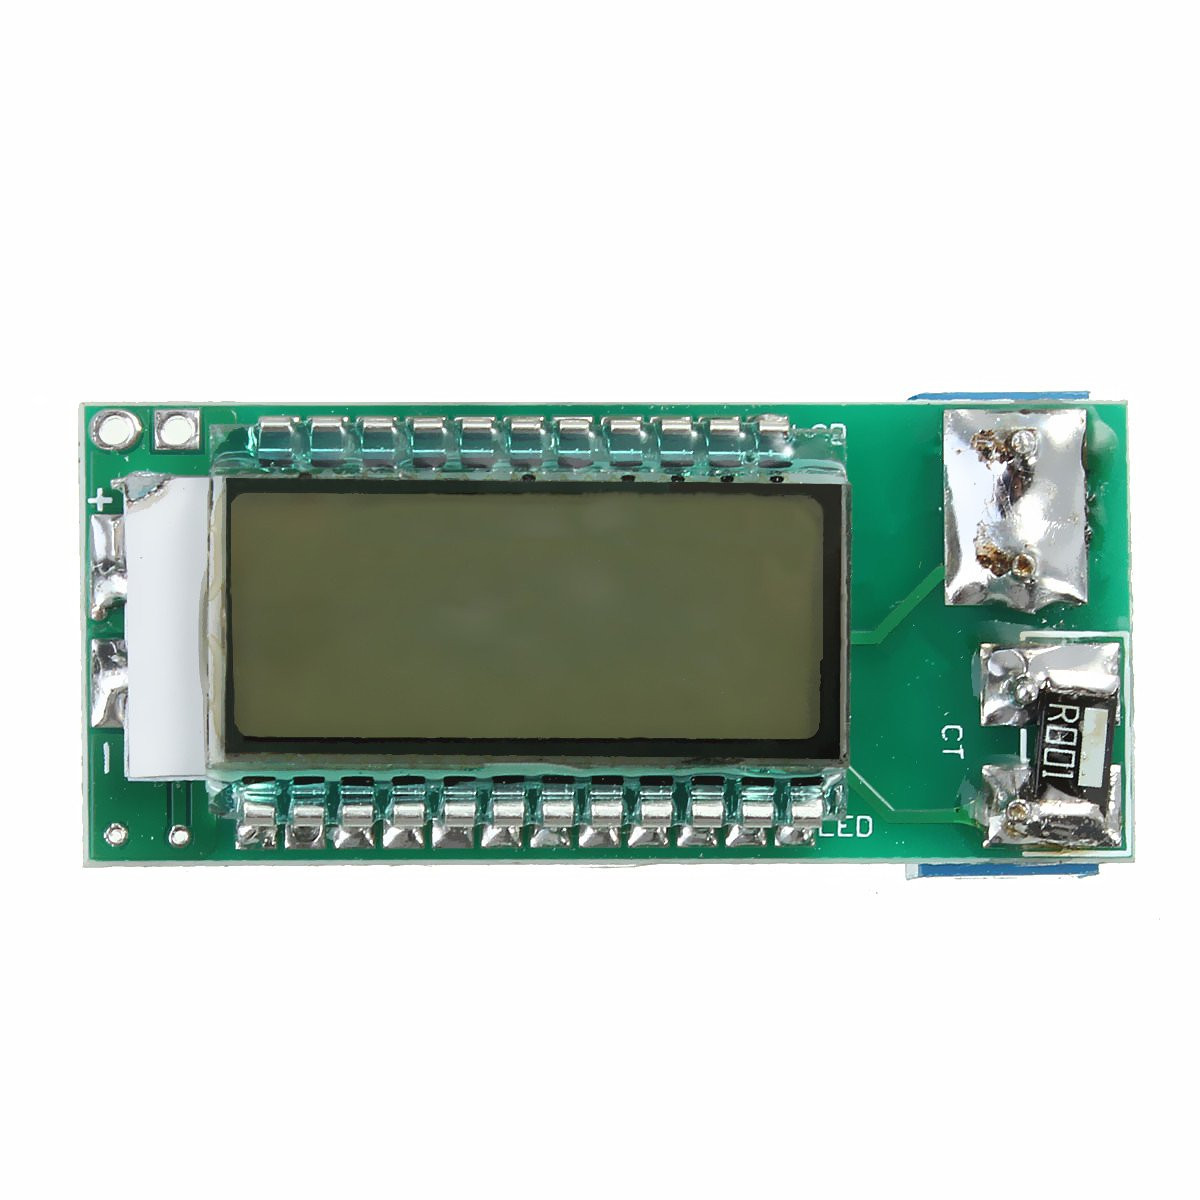 3pcs-18650-26650-Lithium-Li-ion-Battery-Capacity-Tester-LCD-Meter-Voltage-Current-Capacity-1328697